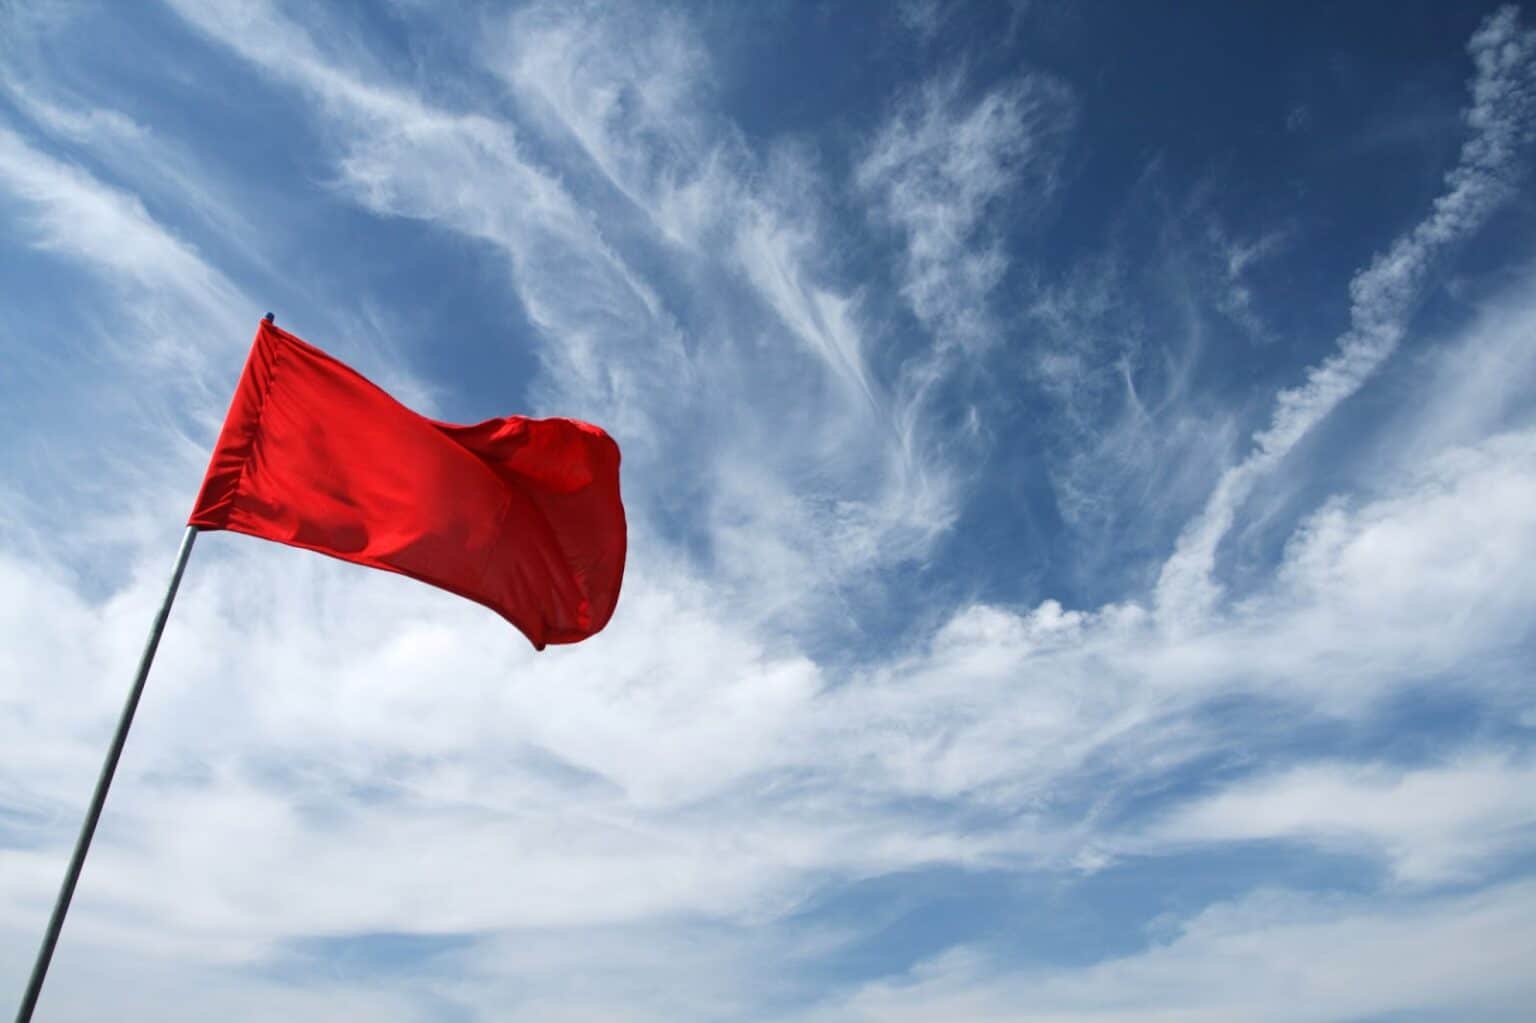 5 Red Flags to Look for In Franchise Opportunities